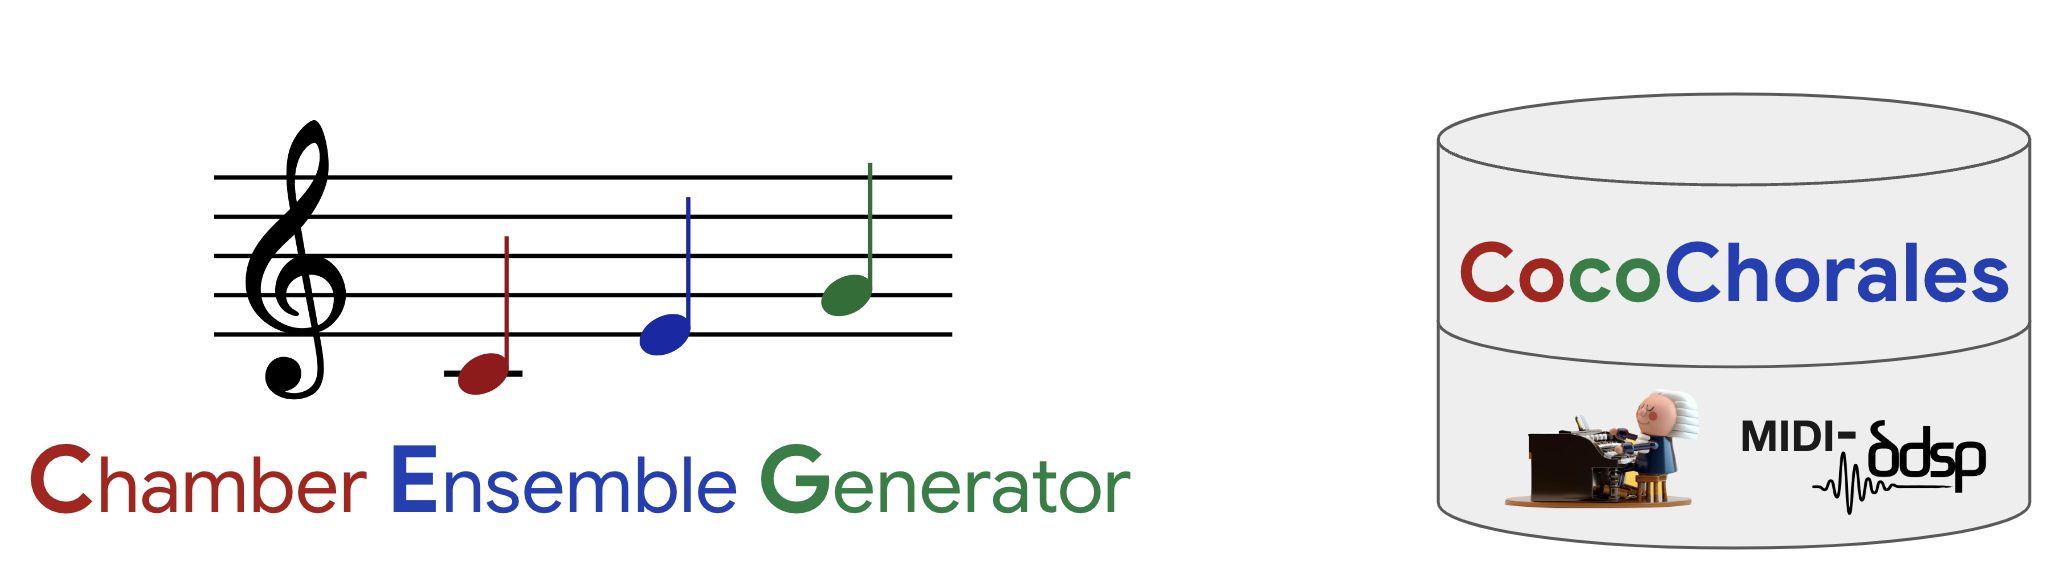 Logos for the Chamber Ensemble Generator and CocoChorales Dataset.